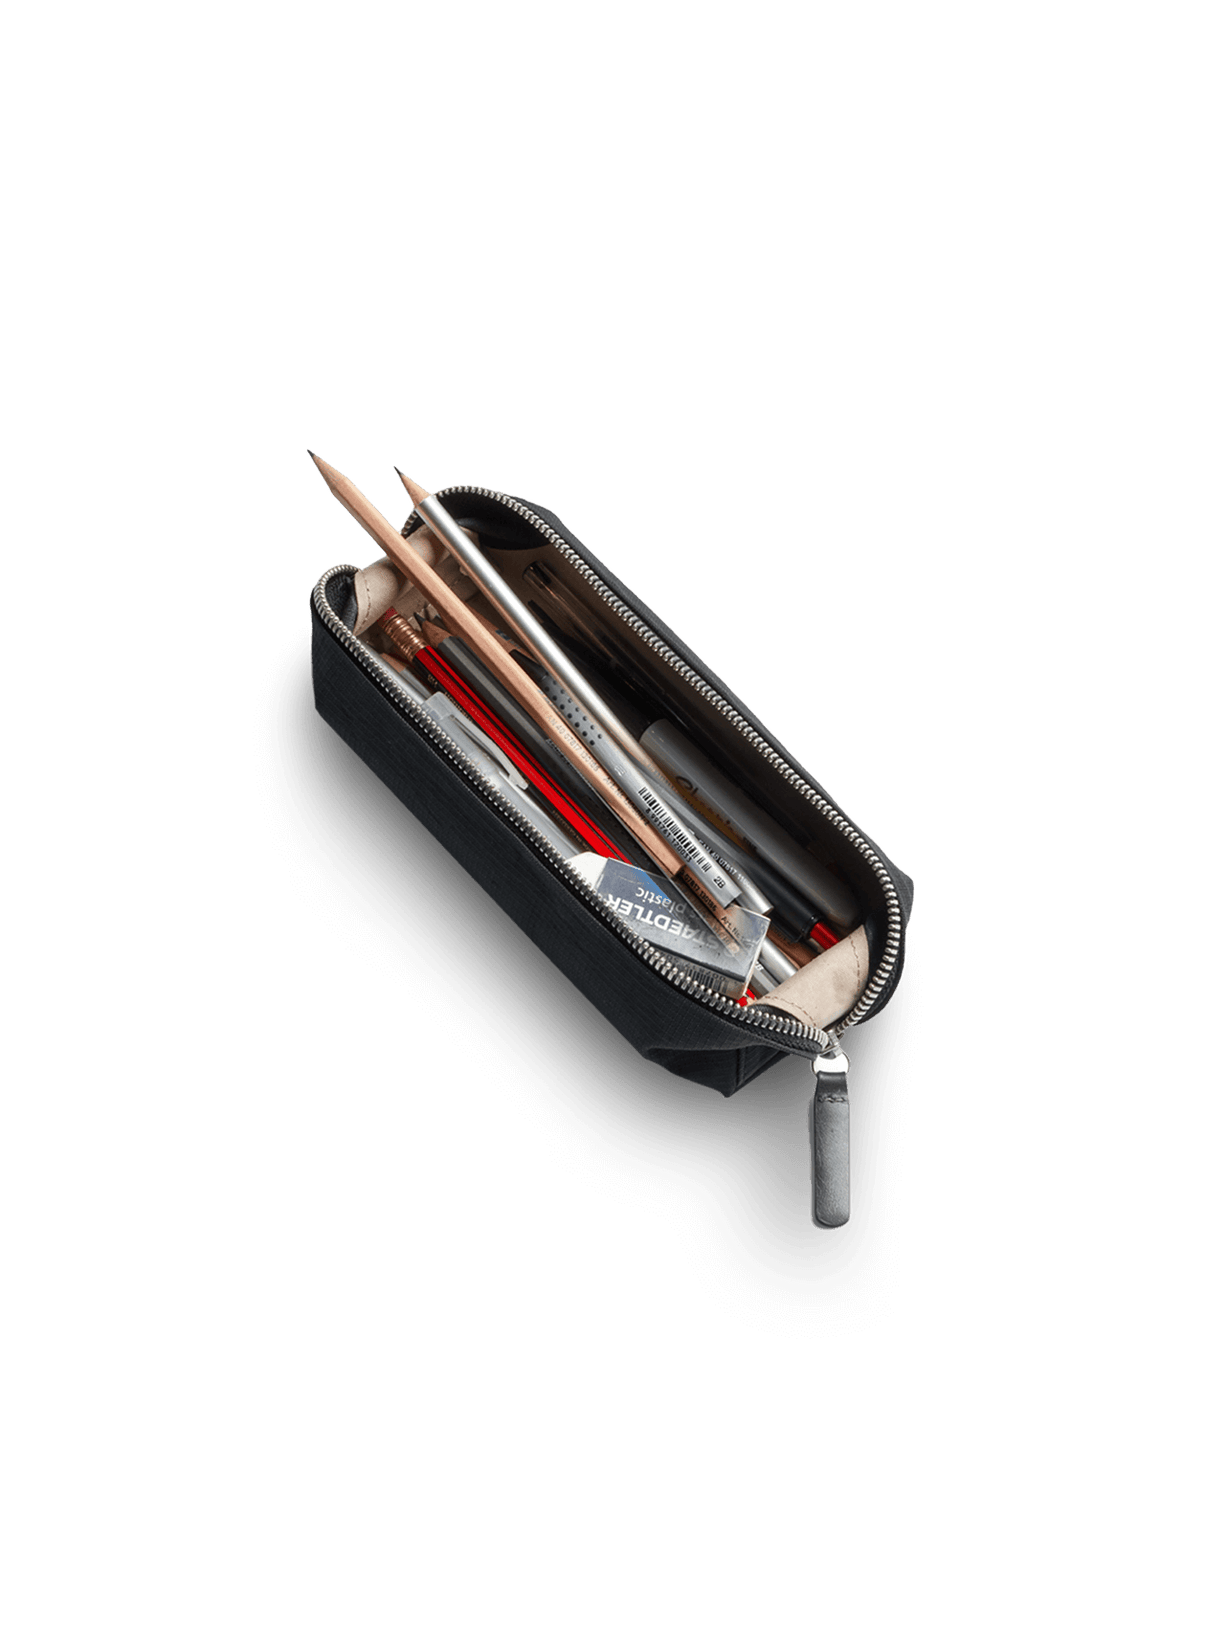 Bellroy Pencil Case product image filled with pens and pencils